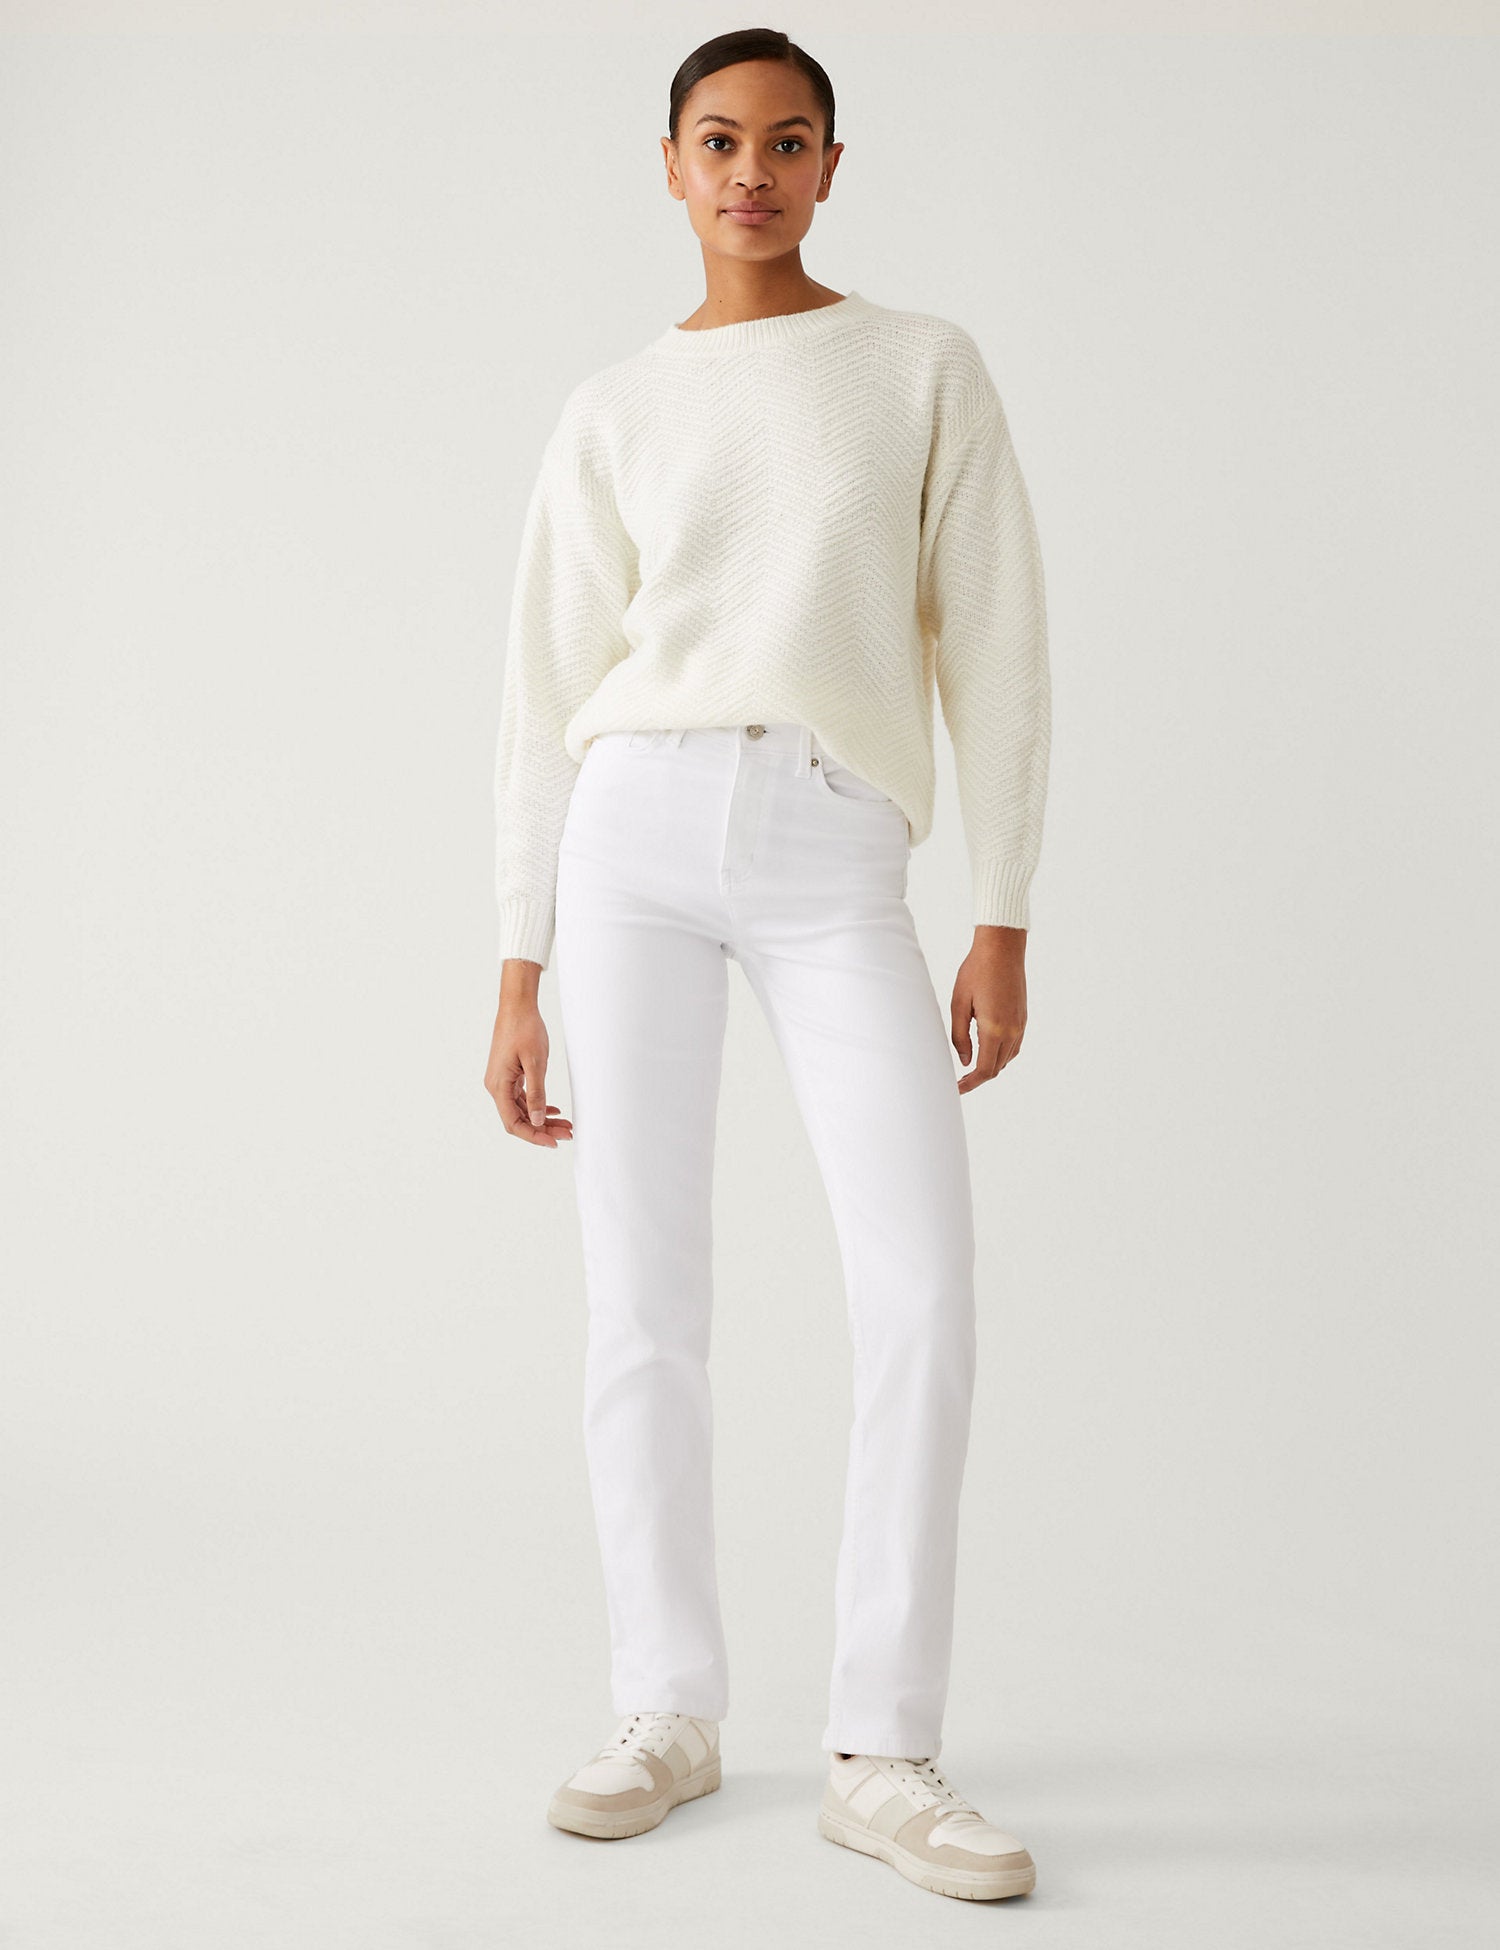 Sienna Straight Leg Jeans with Stretch